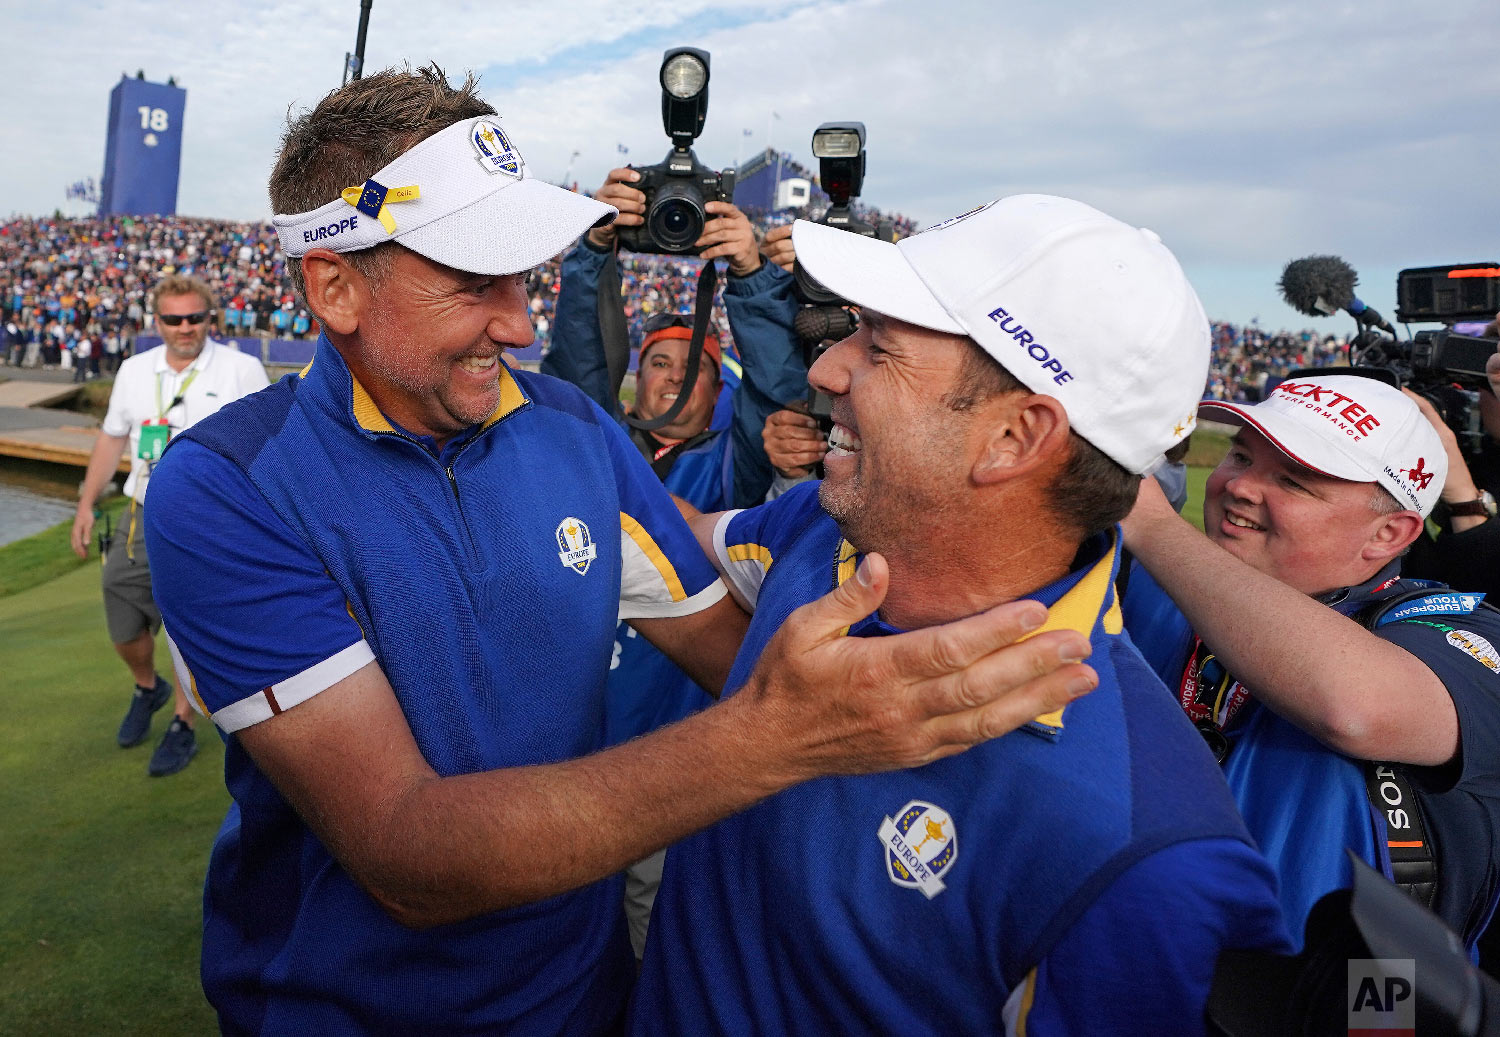  Europe's Sergio Garcia, right, celebrates with Ian Poulter after Europe won the Ryder Cup on the final day of the 42nd Ryder Cup at Le Golf National in Saint-Quentin-en-Yvelines, outside Paris, France, on Sept. 30, 2018. (AP Photo/Laurent Cipriani) 